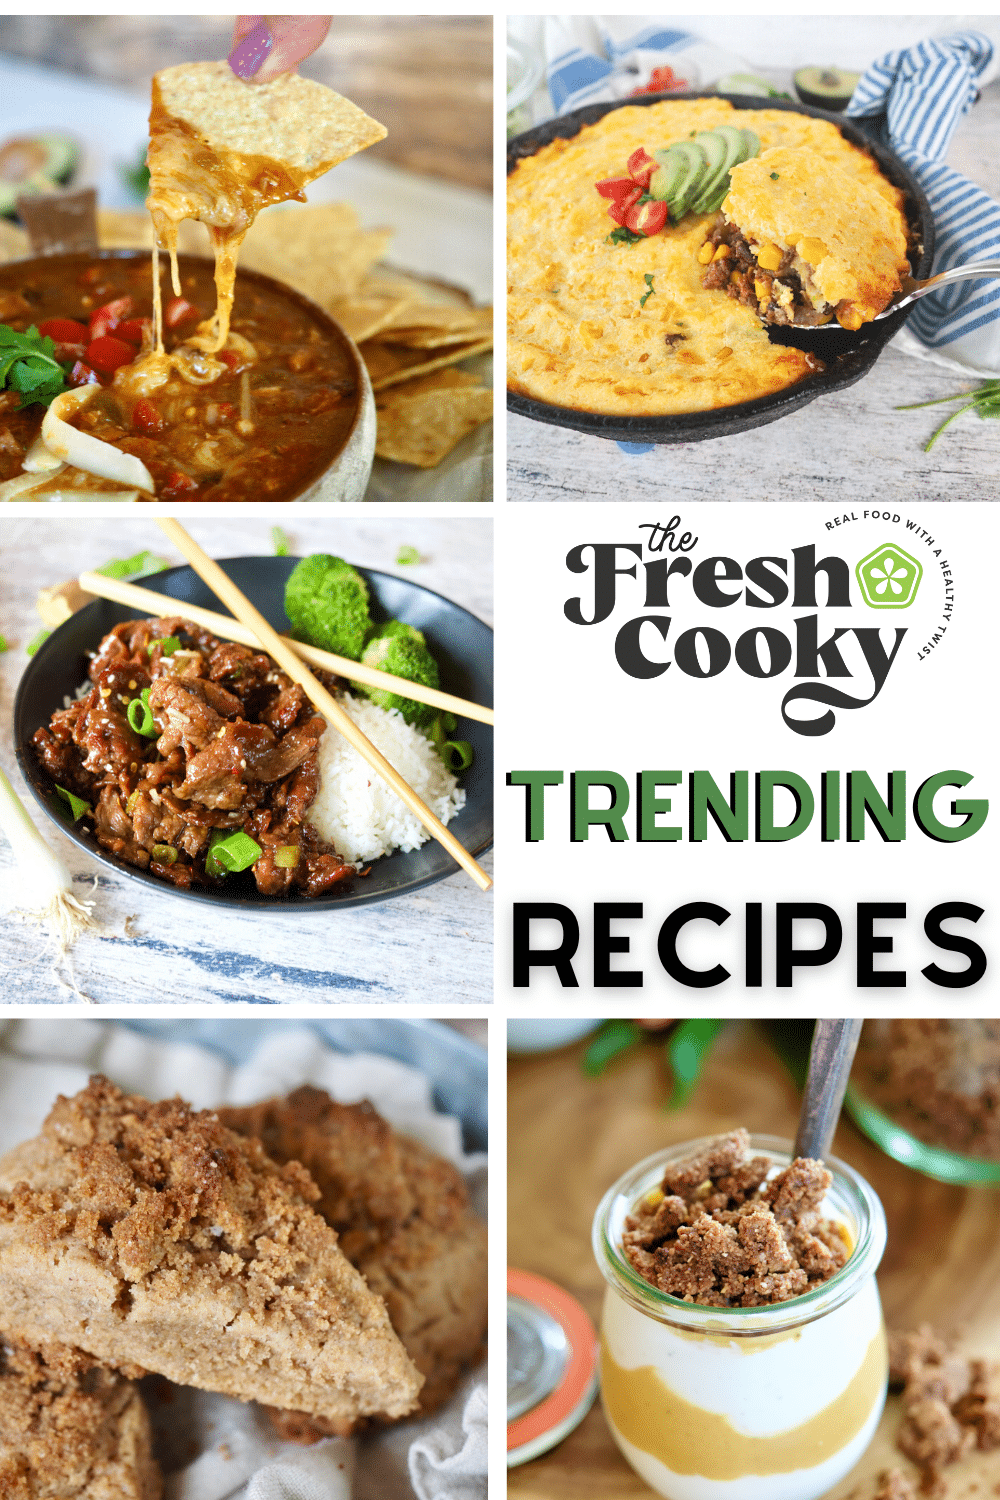 October trending recipes from The Fresh Cooky for pinning.